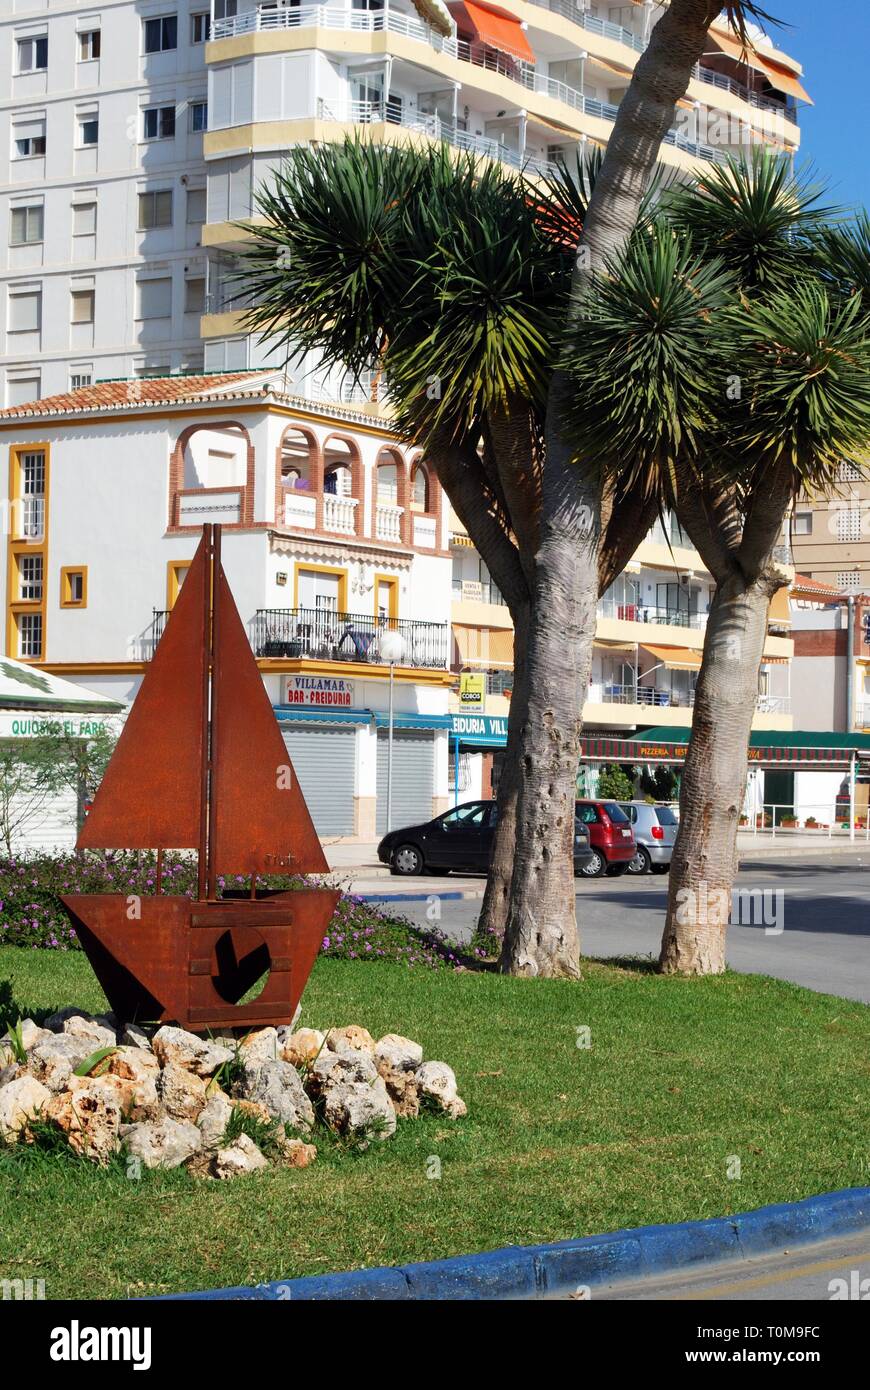 Metal boat sculpture on a traffic island with palm trees to the rear, Torre del Mar, Malaga Province, Andalusia, Spain, Western Europe. Stock Photo